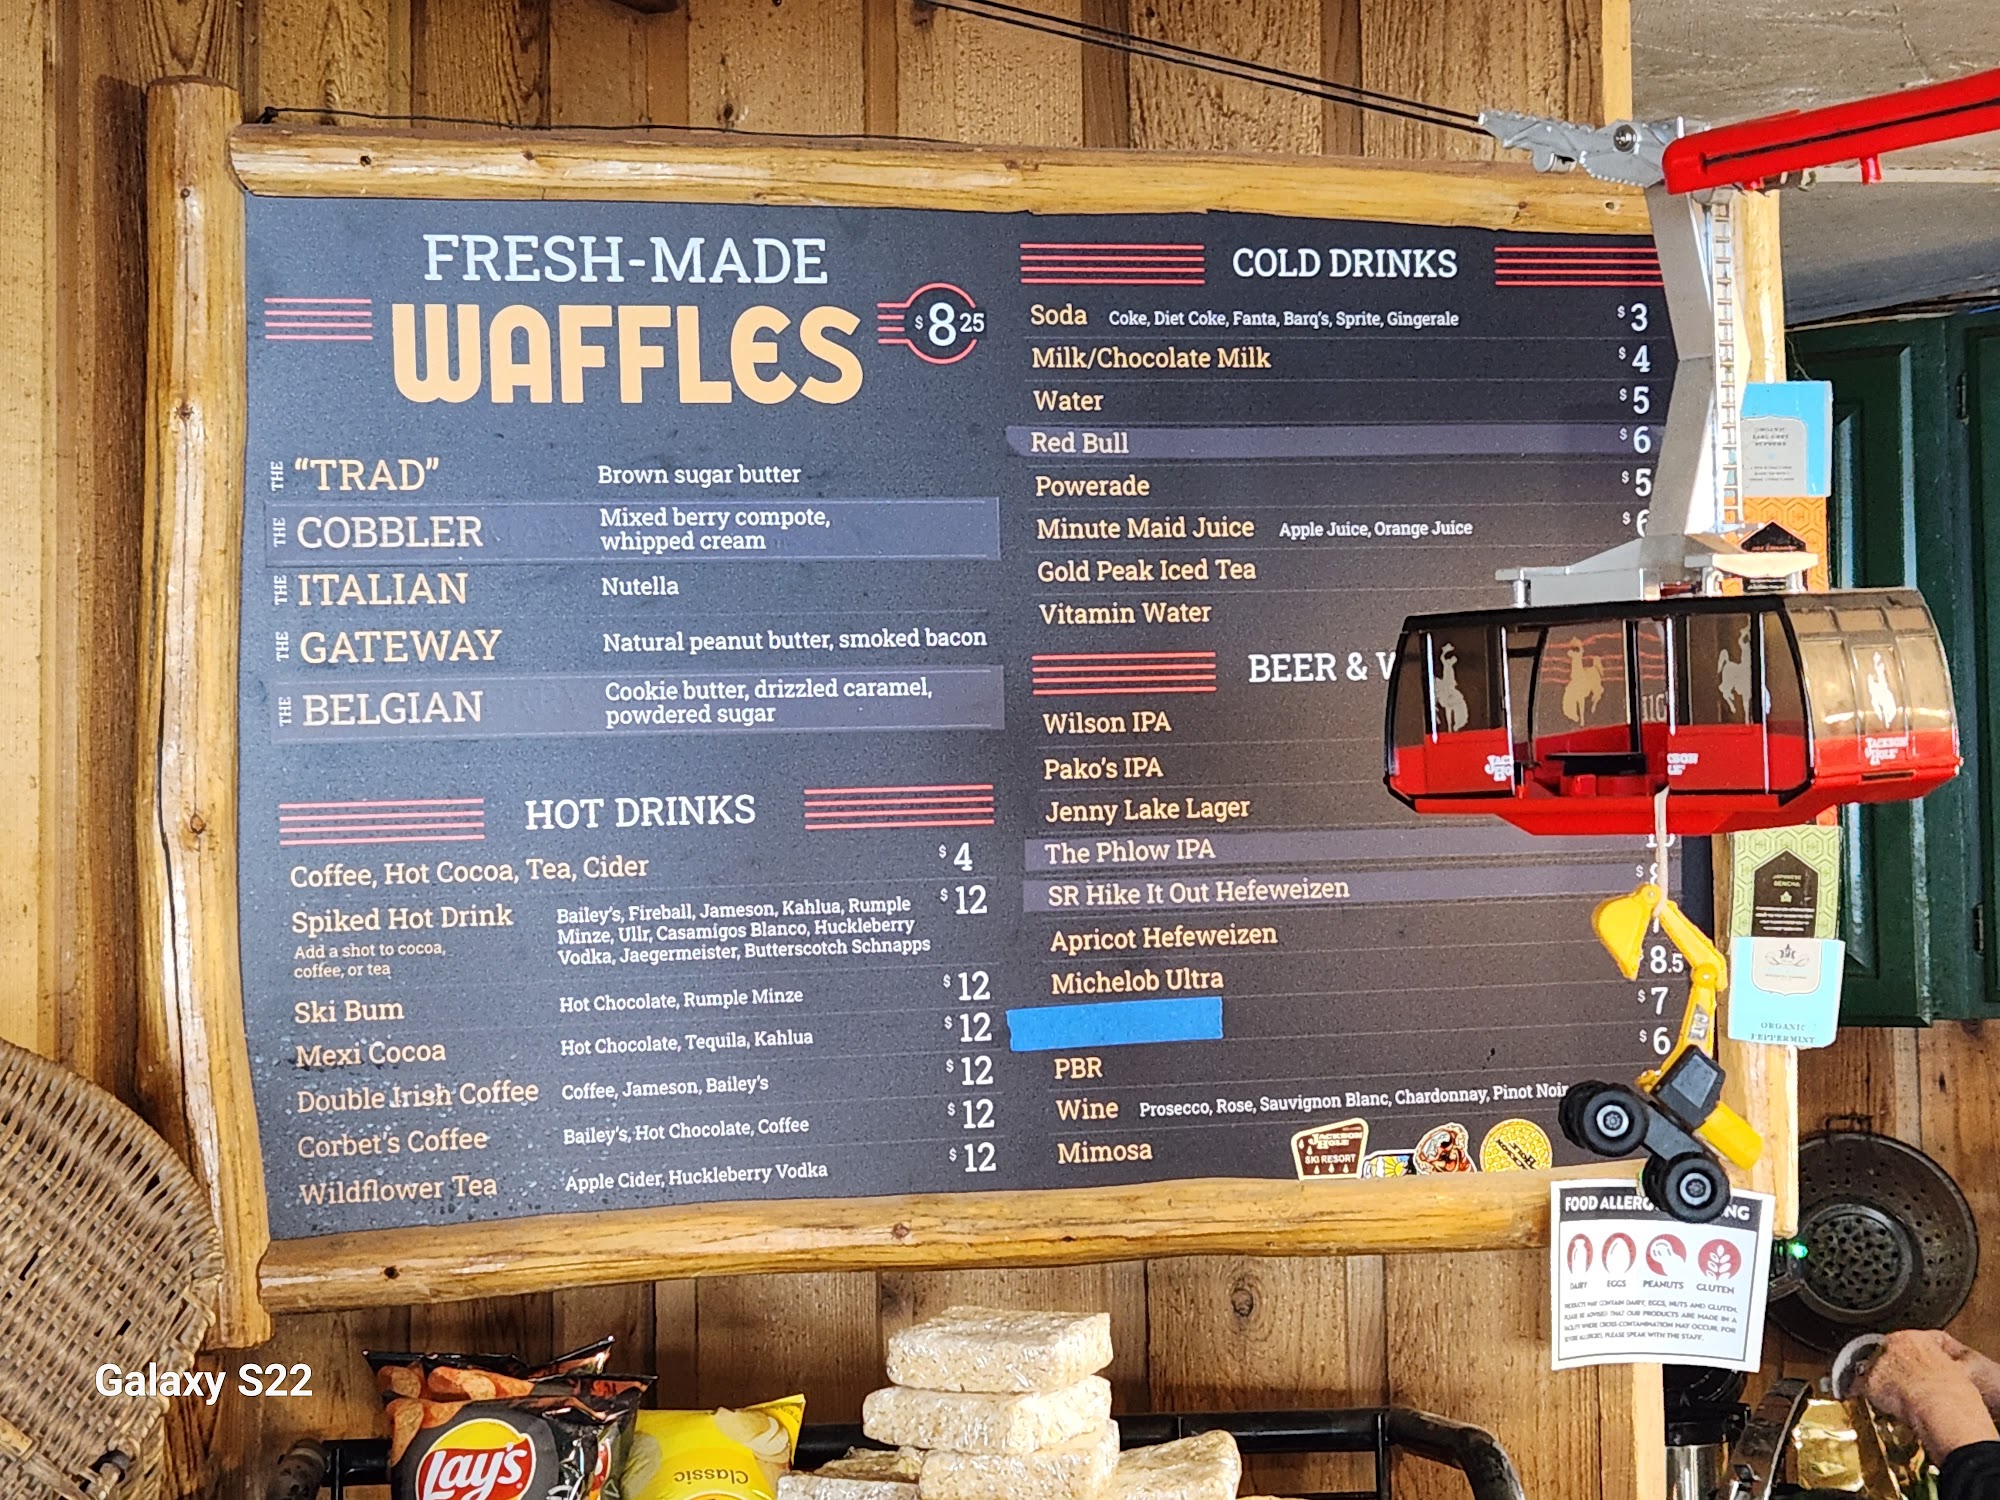 Corbet's Cabin Top of the World Waffles